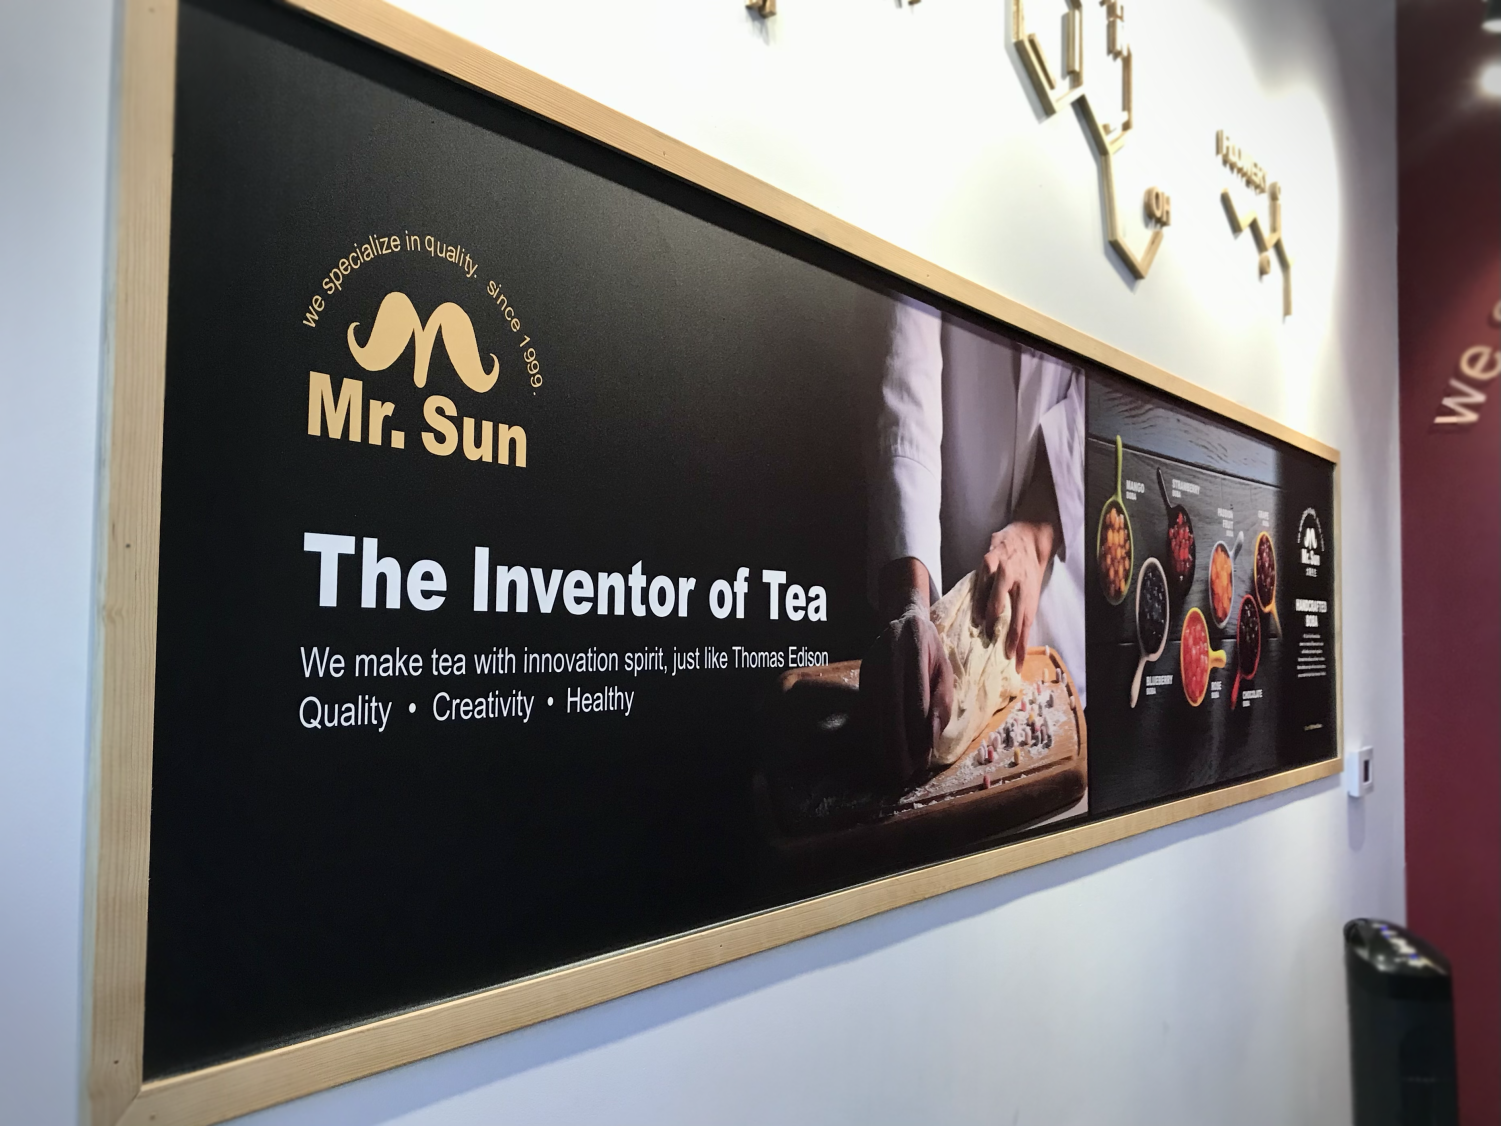 Mr.+Sun+Tea+opens+in+downtown+Pleasanton+after+months+of+preparation